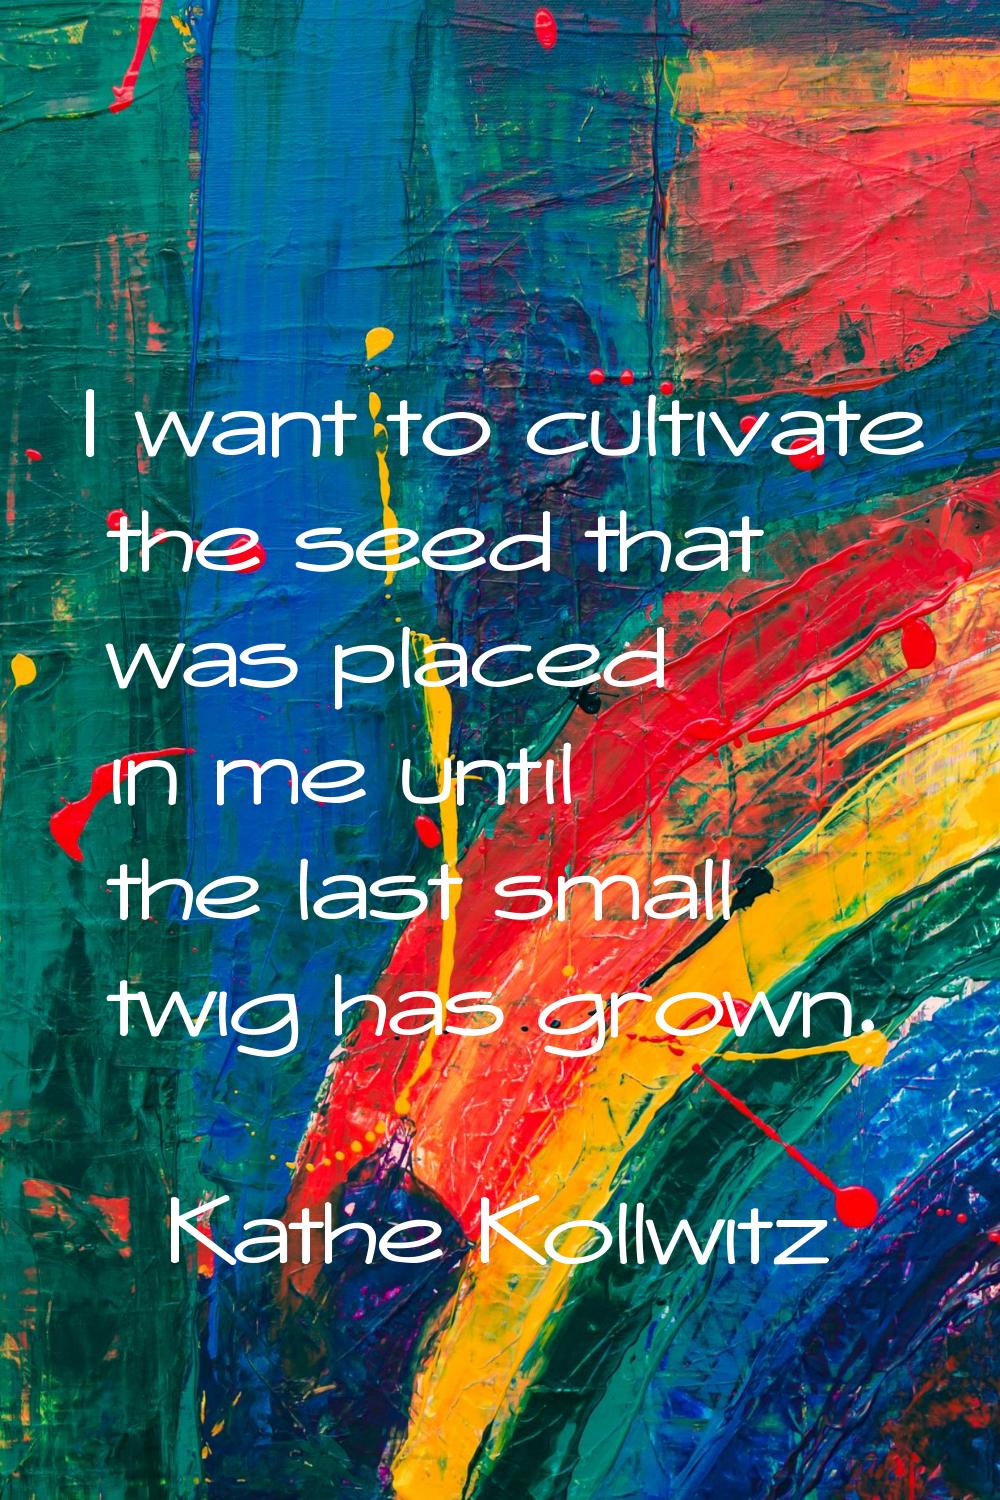 I want to cultivate the seed that was placed in me until the last small twig has grown.